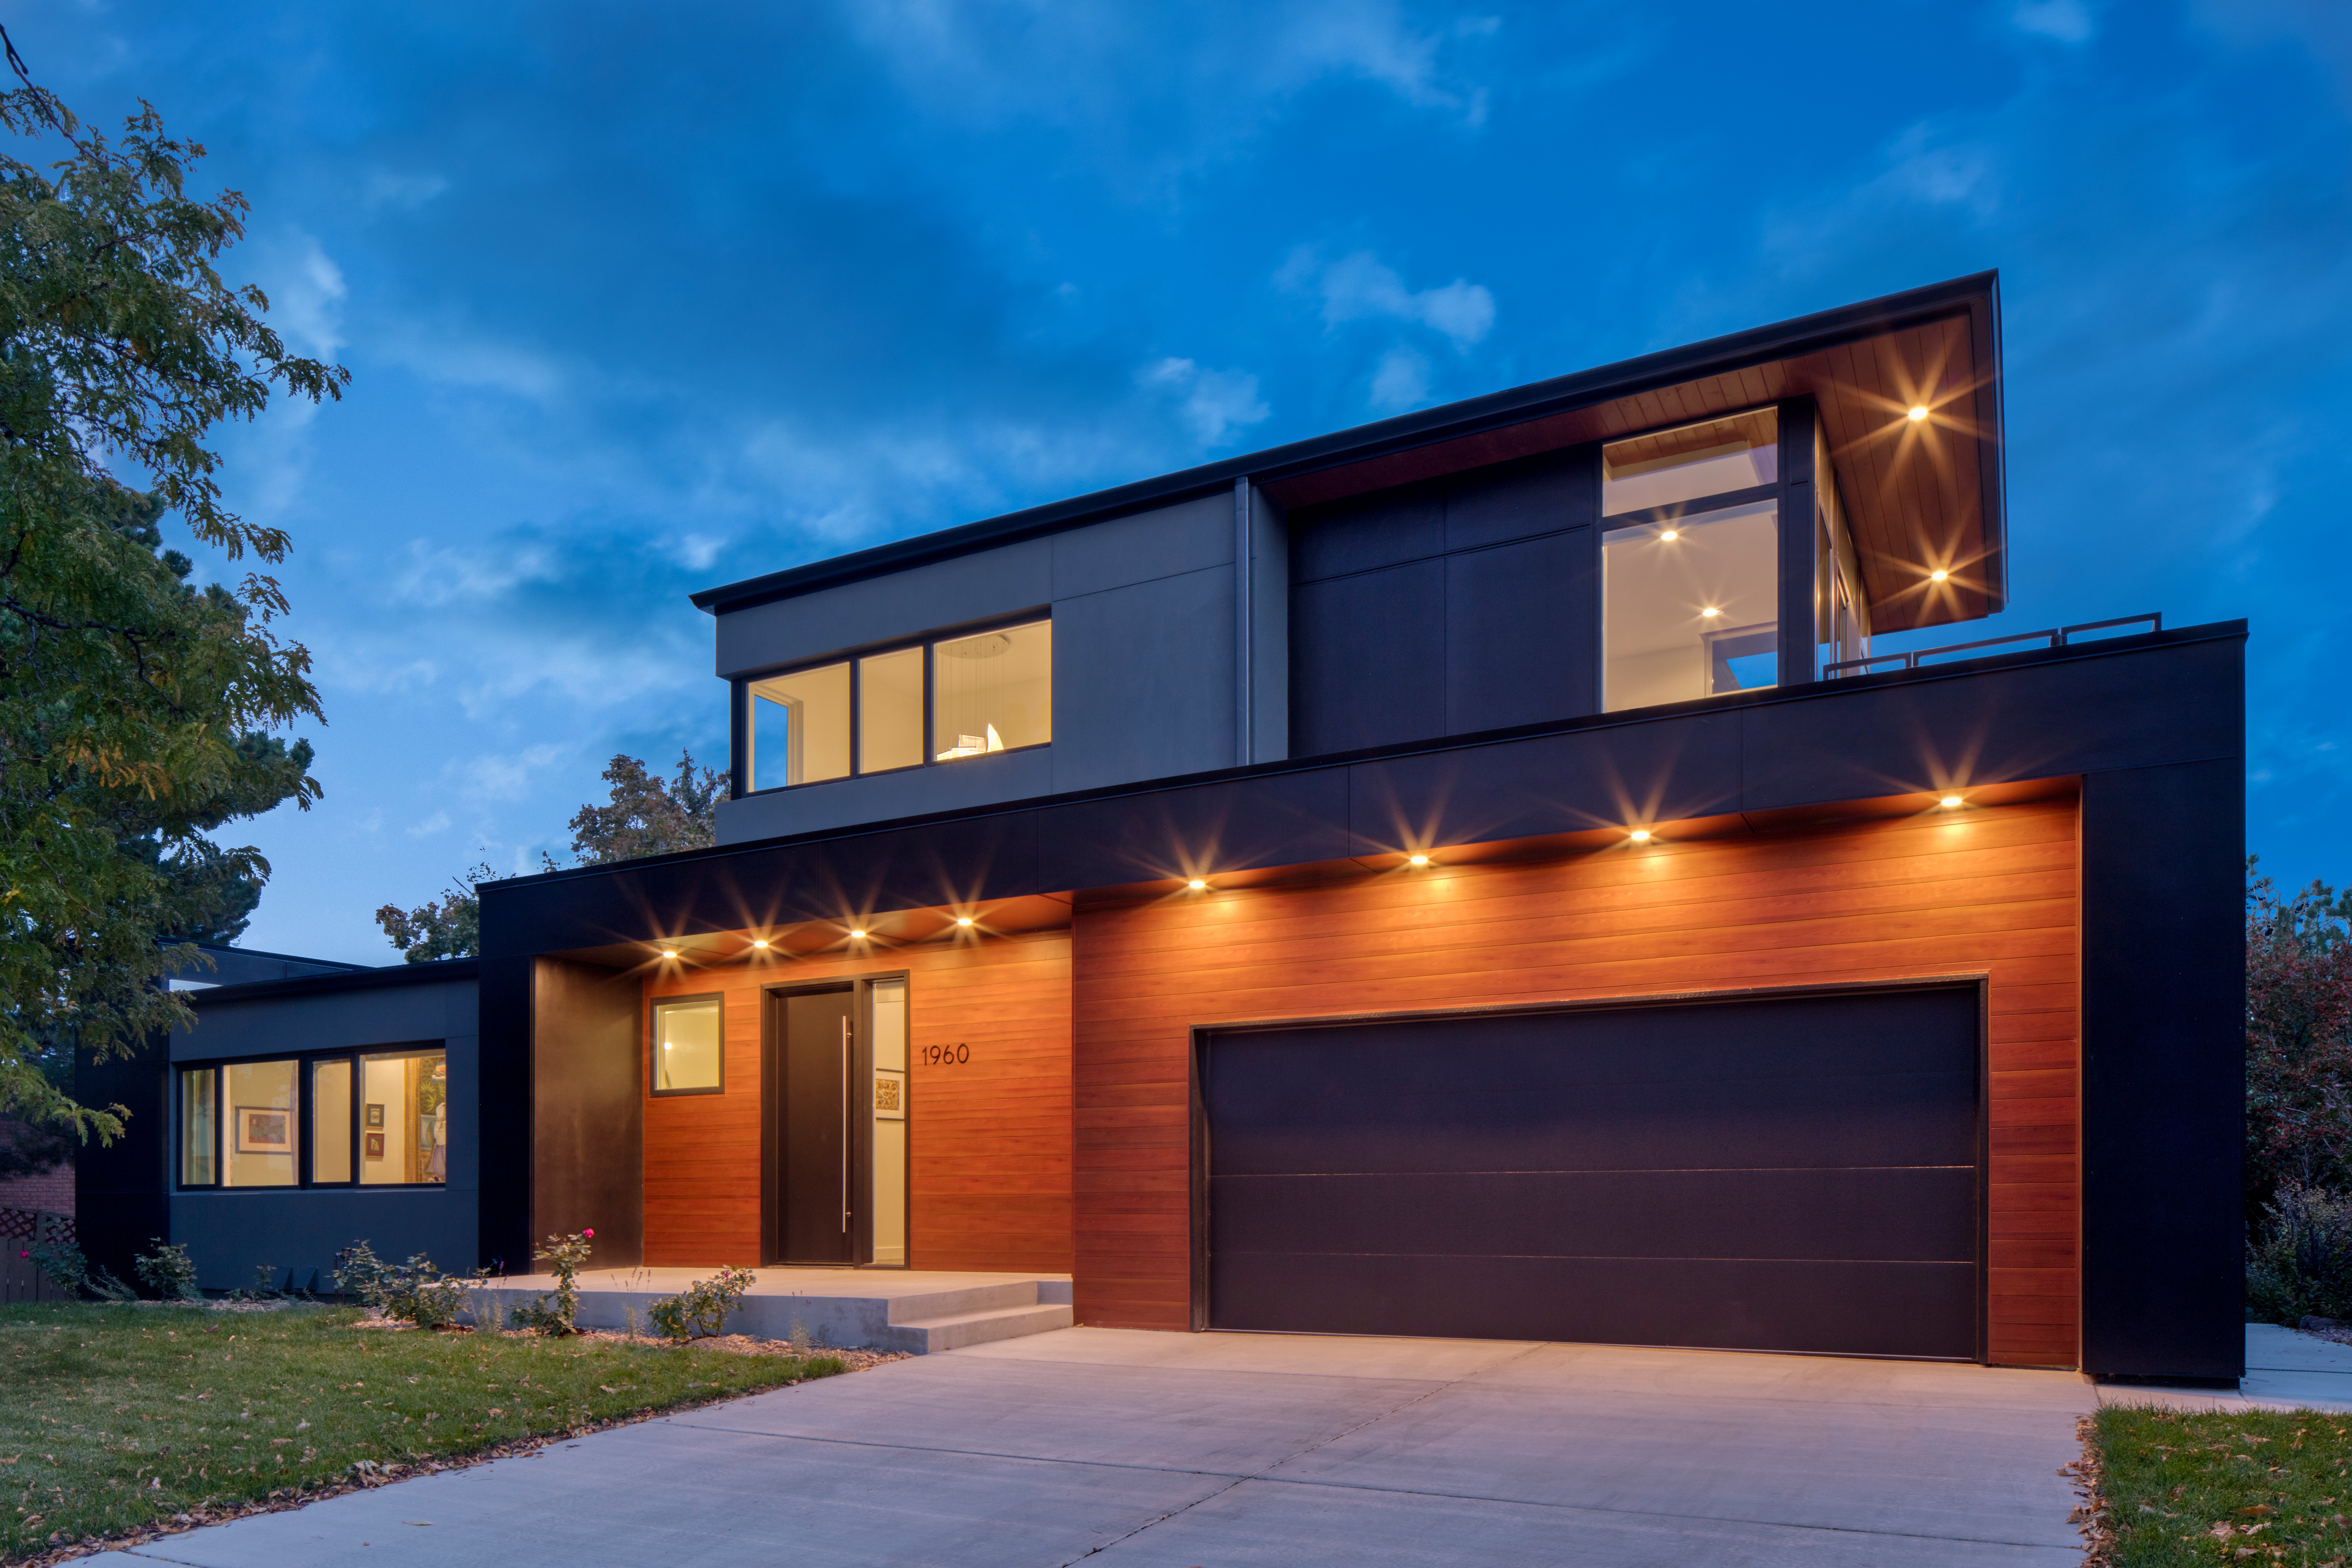 Evening view of a modern two-story Petra Custom Builders home with illuminated exterior sconces and a warm wooden garage door